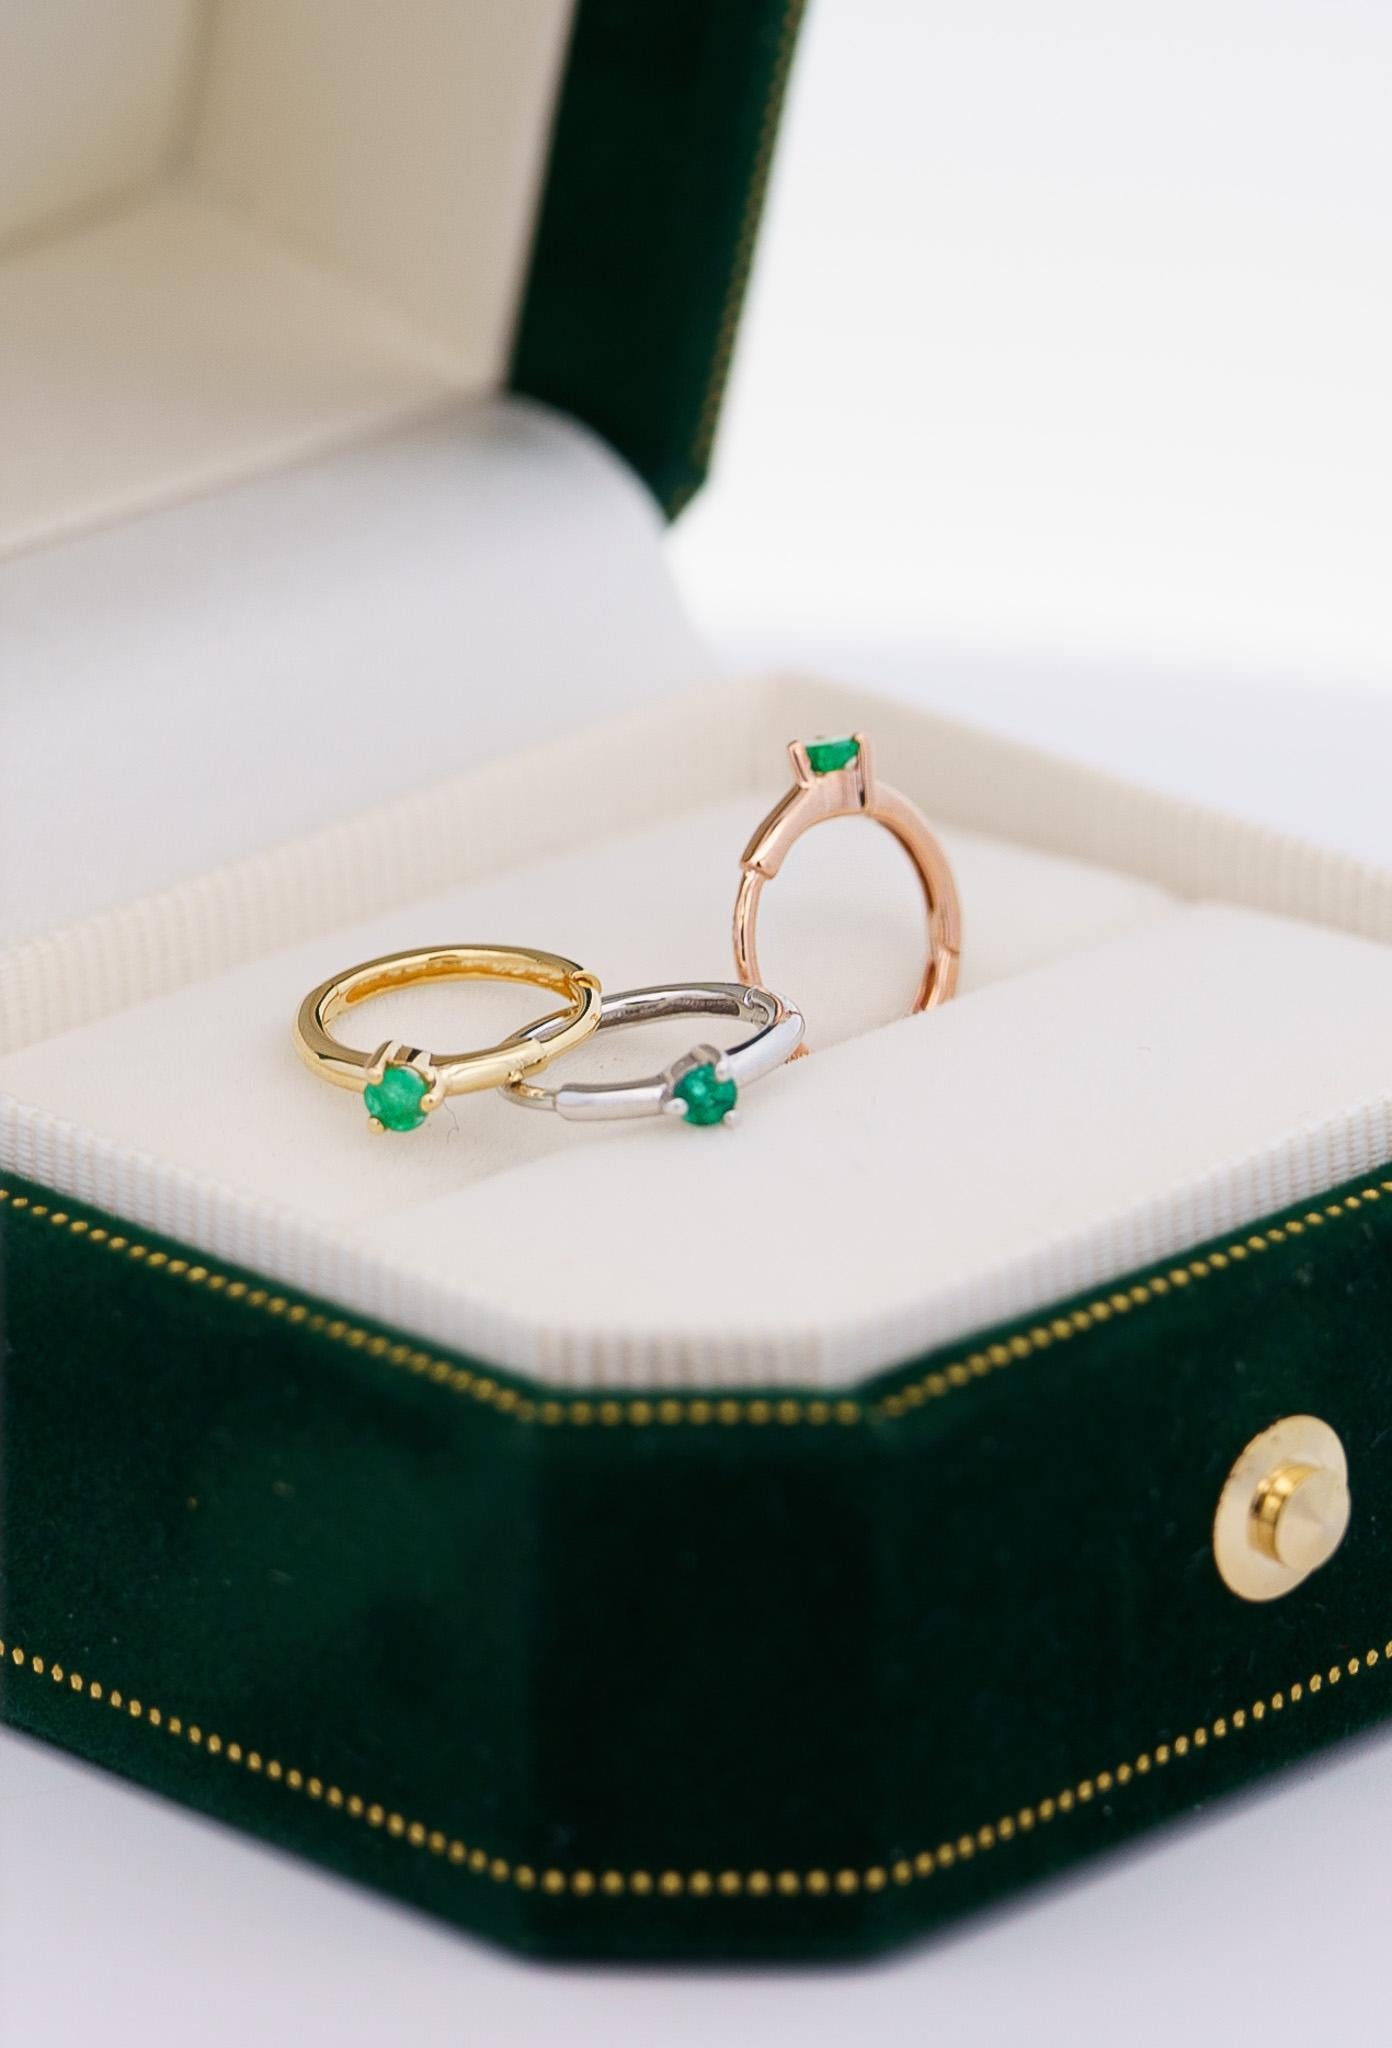 Simple and elegant natural emerald huggie earrings set in 14k solid white gold for long-lasting and durable use. Hypoallergenic, sleep-safe, waterproof, and fixed with a secure lock clip that was made to be worn daily. Ideal for earlobe, cartilage,